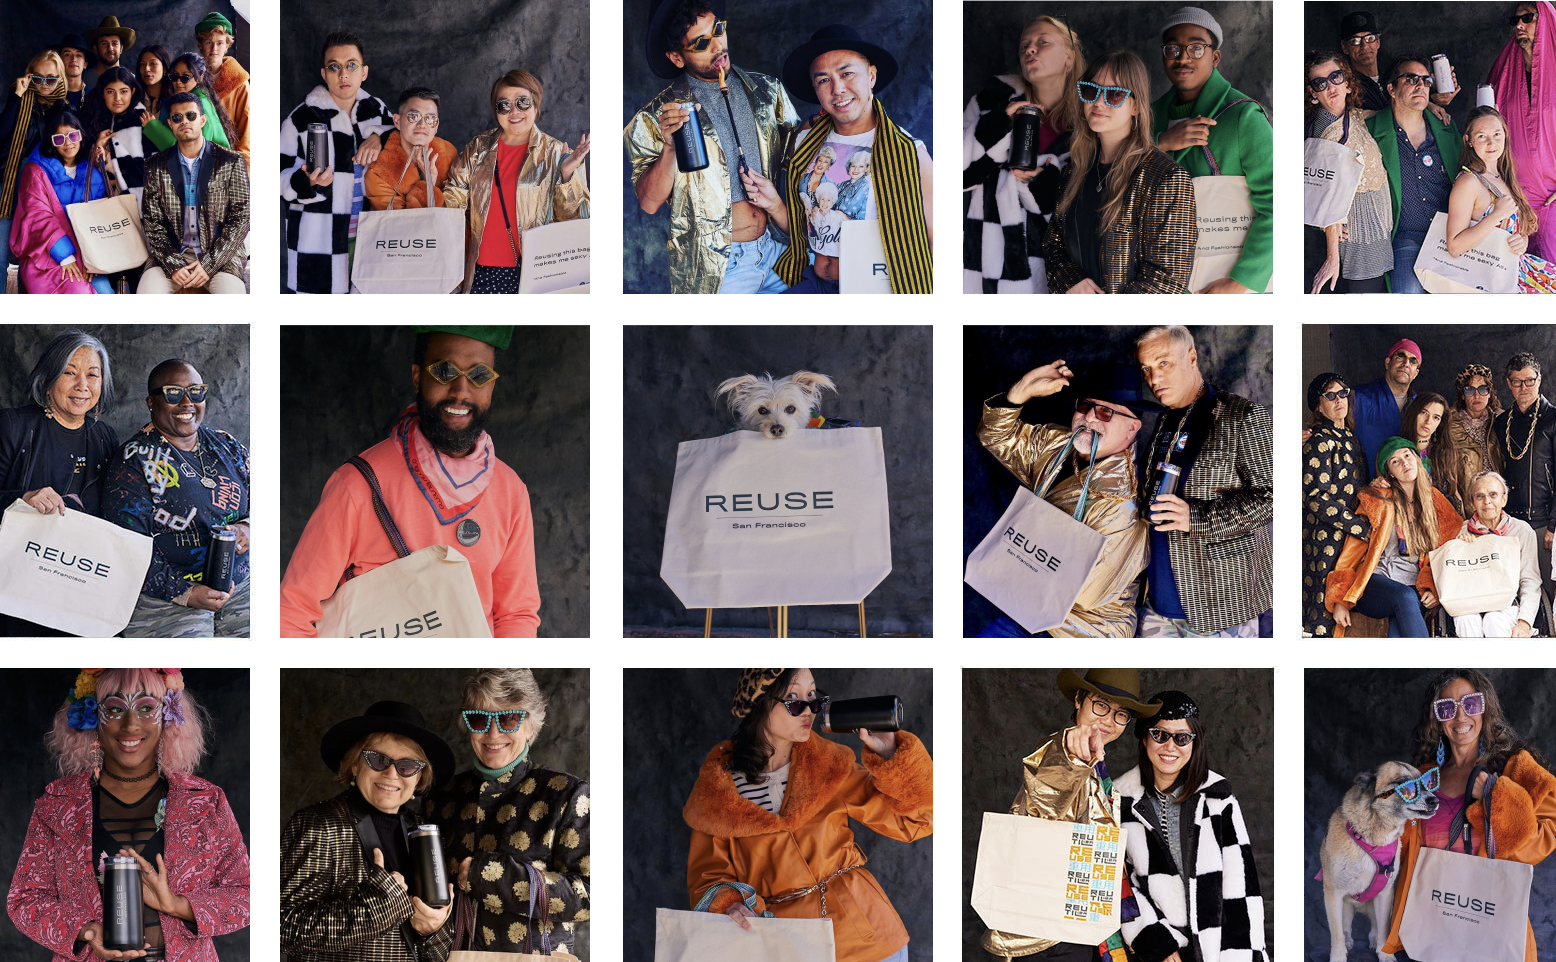 A collage of pictures of people dressed up in costumes holding Reuse-branded products.